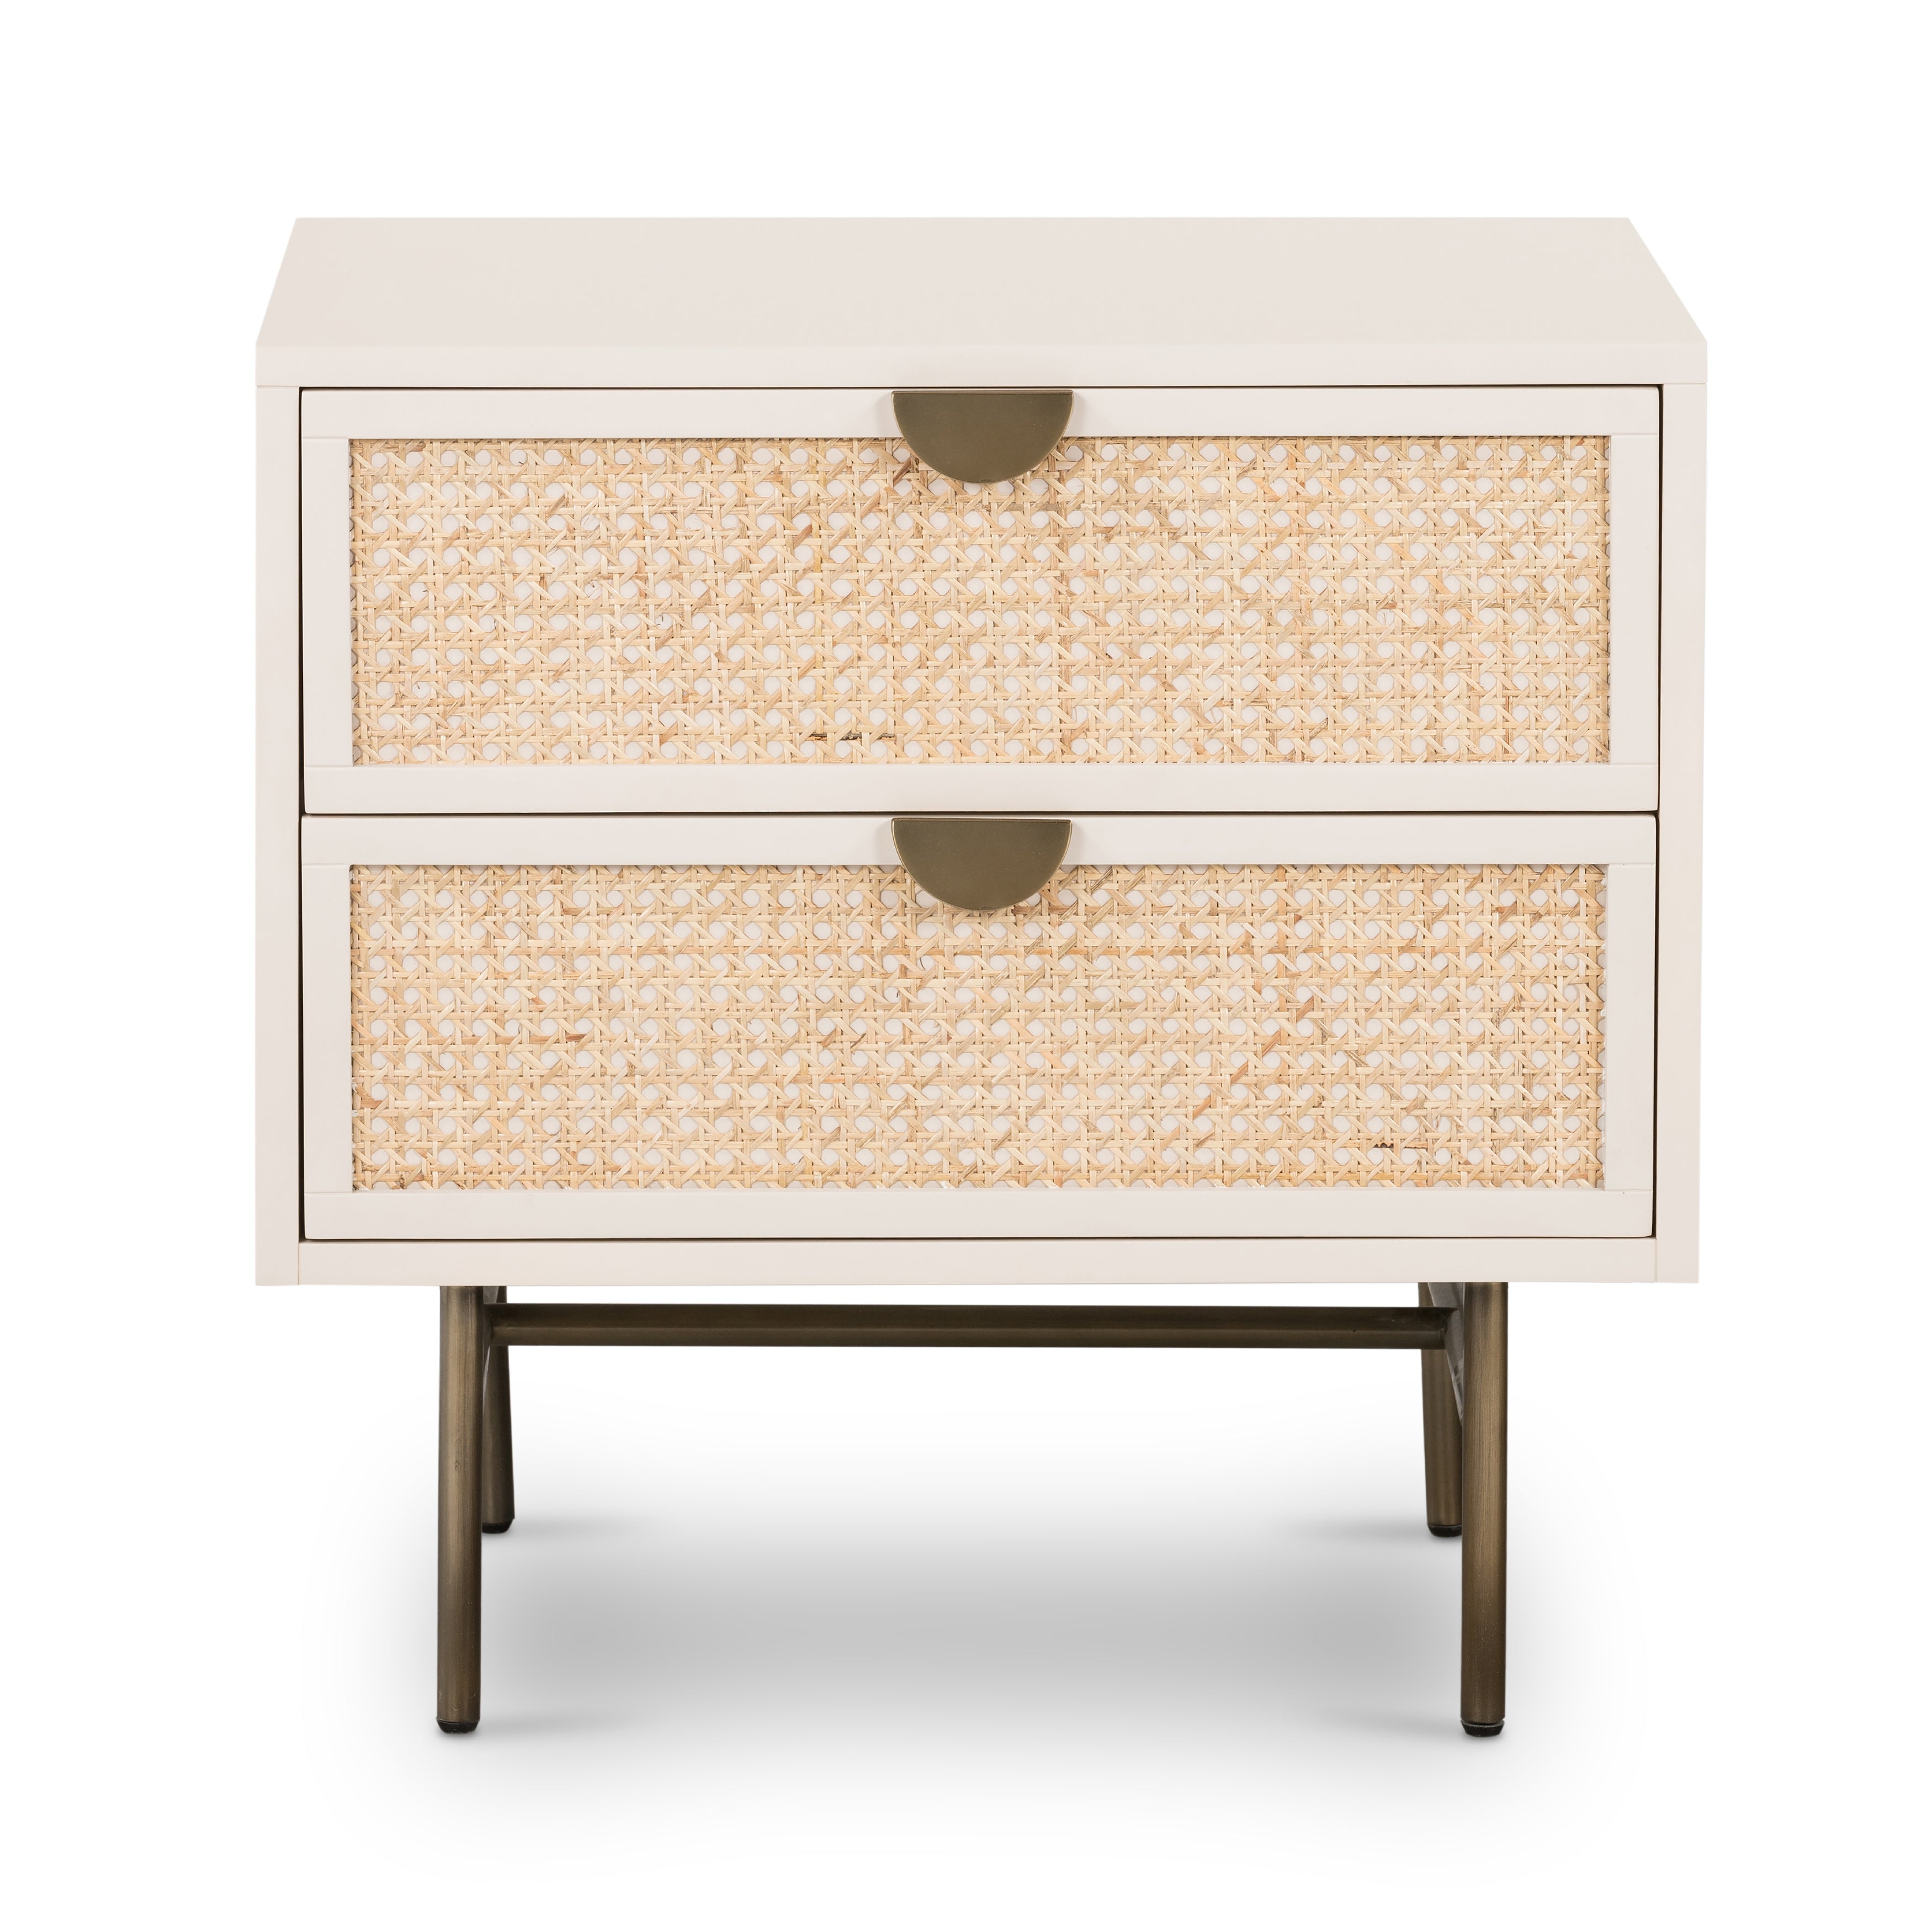 Bring a light look to bedroom styling with this Luella Nightstand - Matte Alabaster. The two-drawer nightstand features woven cane panels and half-moon hardware finished in an aged brass.  Overall Dimensions: 24.00"w x 18.00"d x 24.00"h